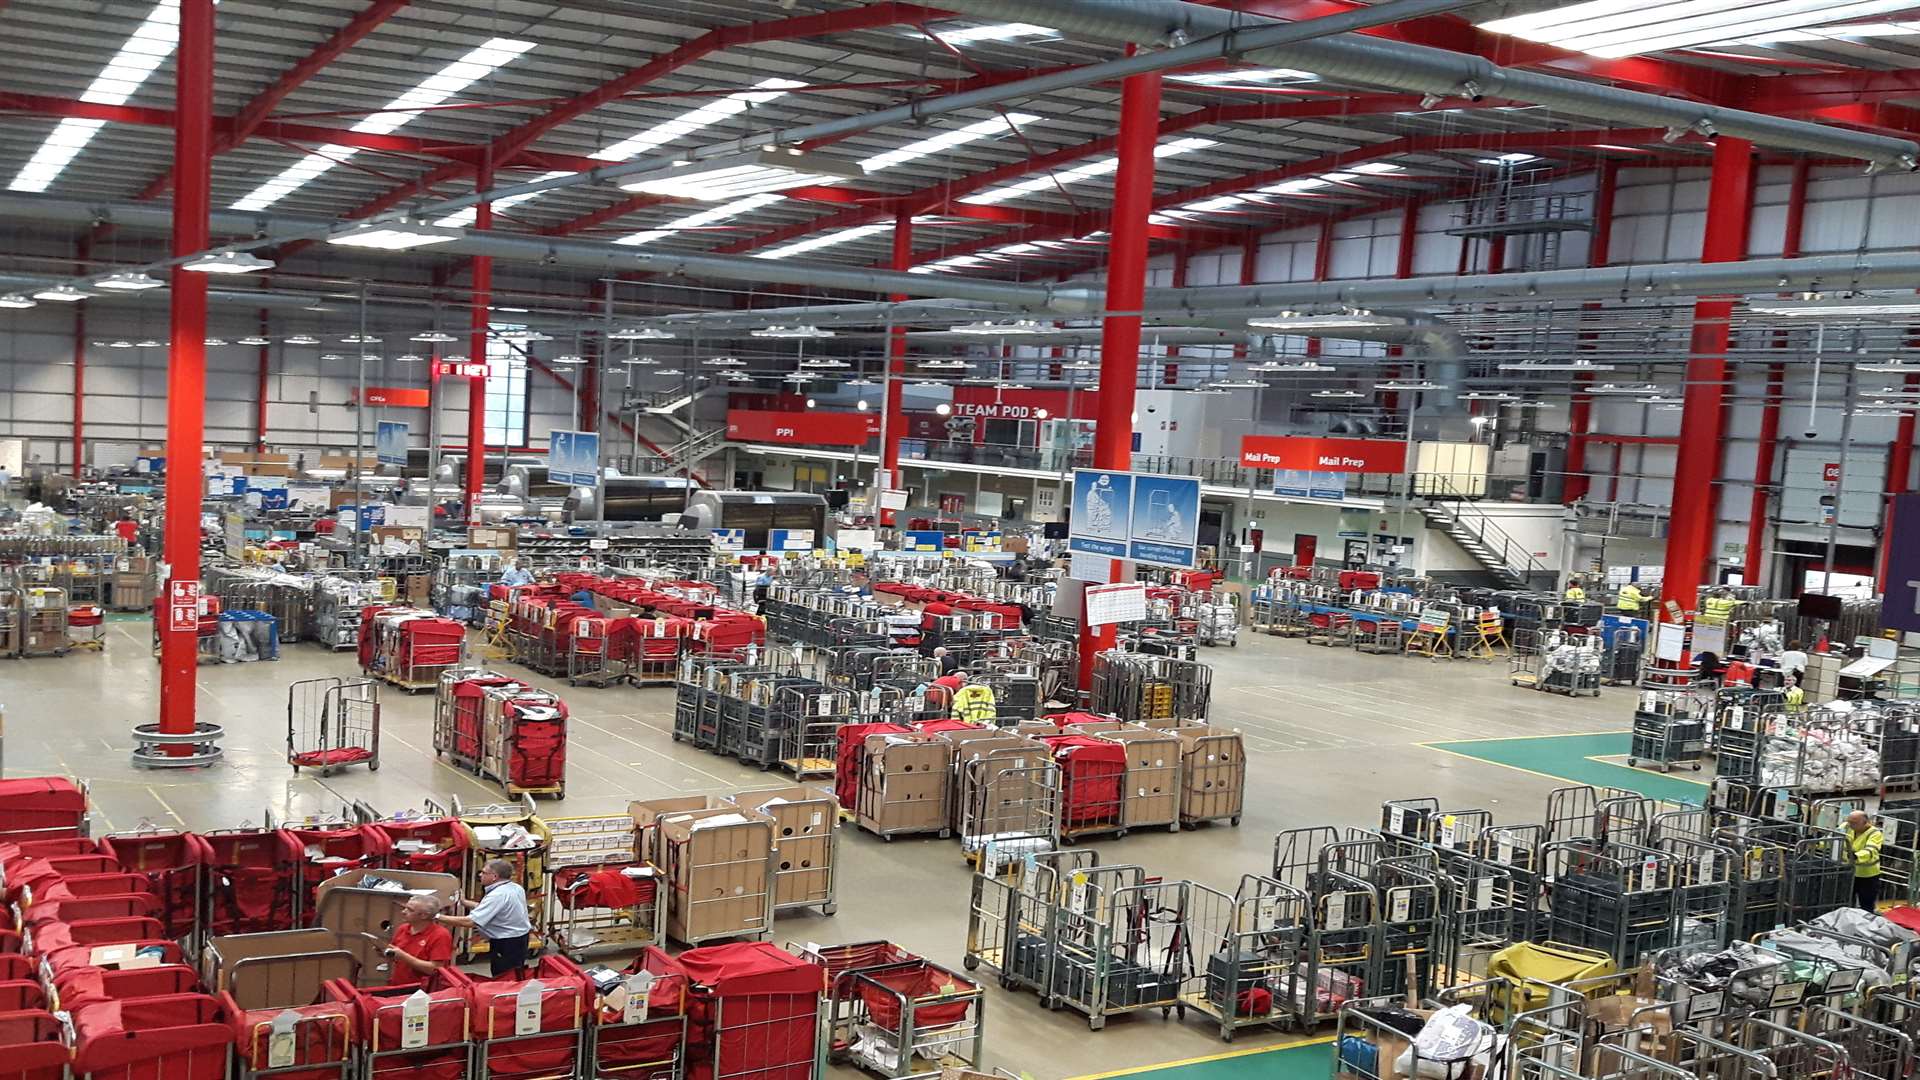 The Medway Mail Centre in Strood